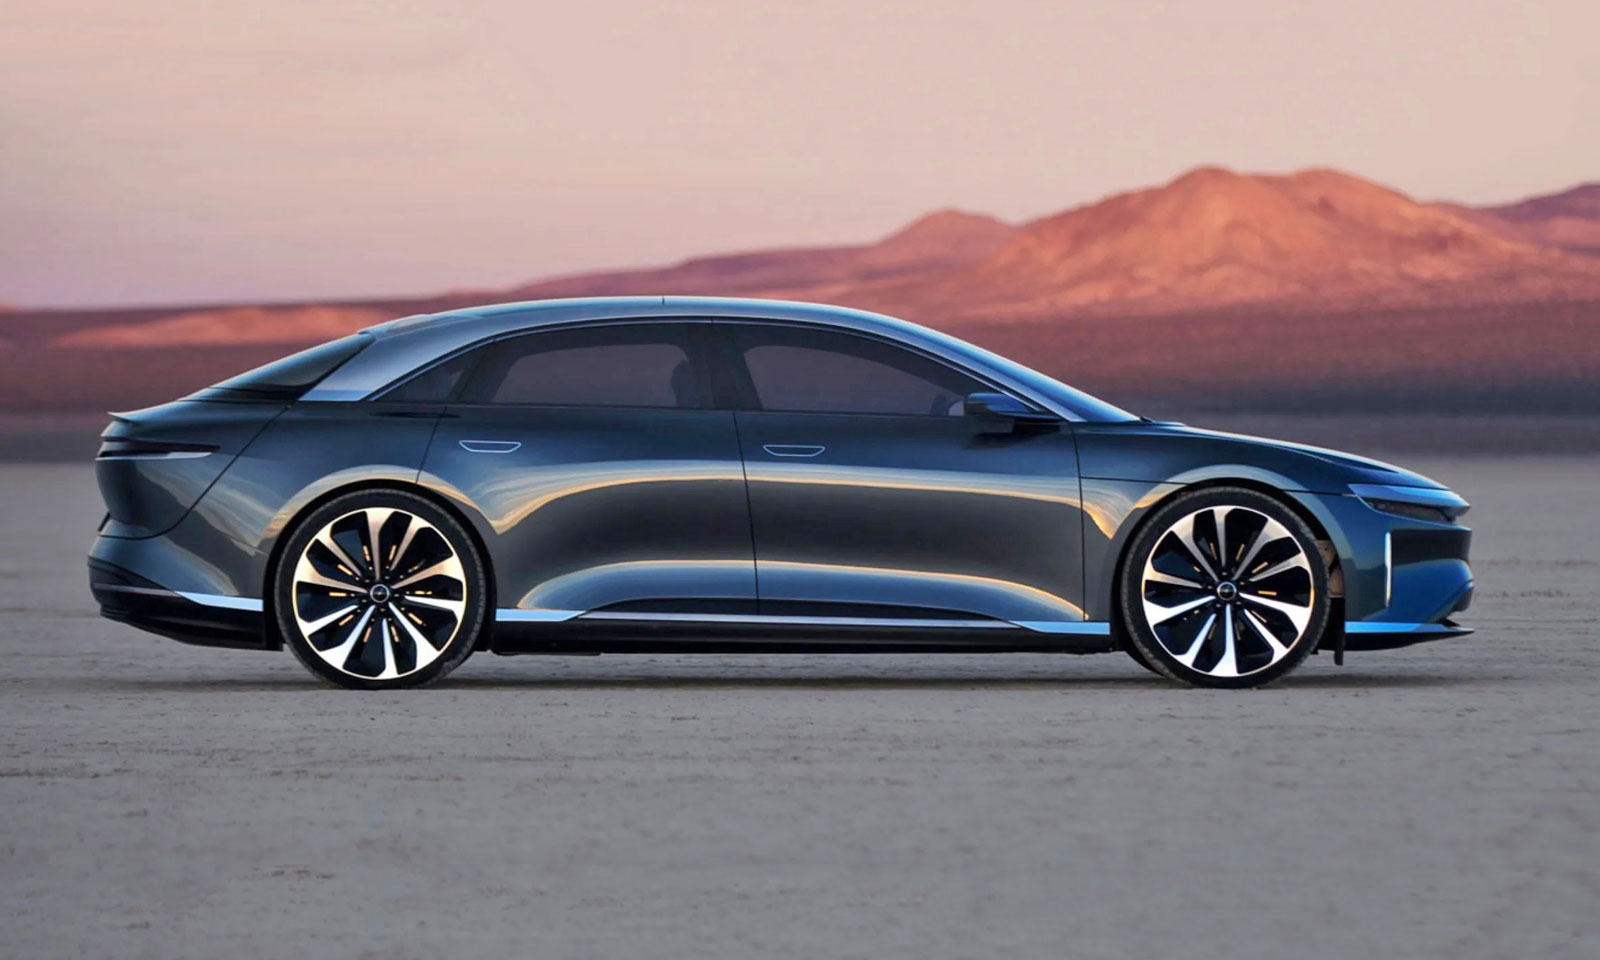 Top All-Electric Luxury Cars To Consider for the New Year